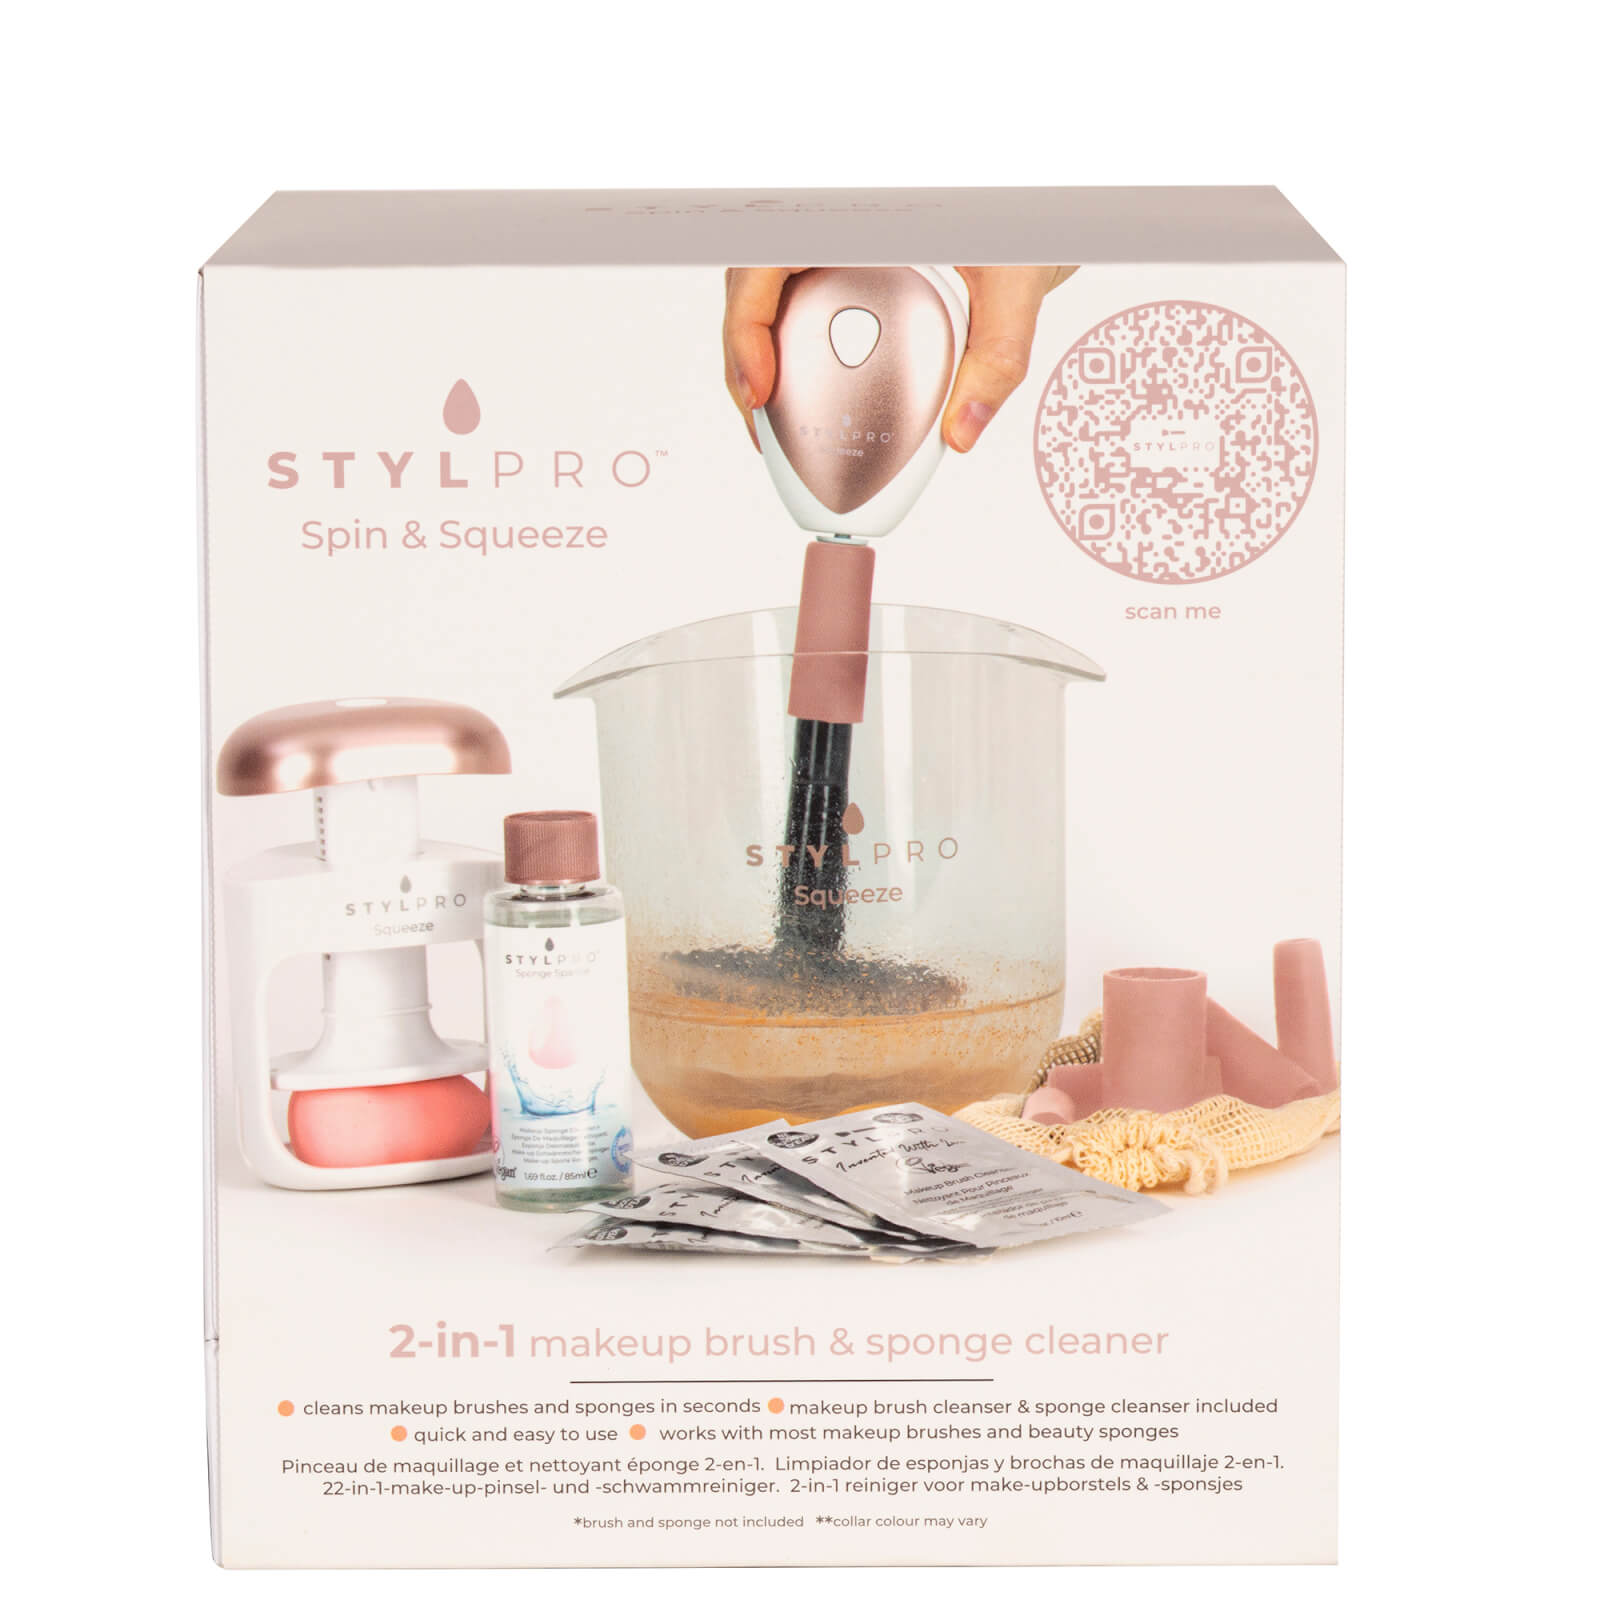 Stylpro Spin And Squeeze Makeup Brush And Beauty Sponge Cleaner